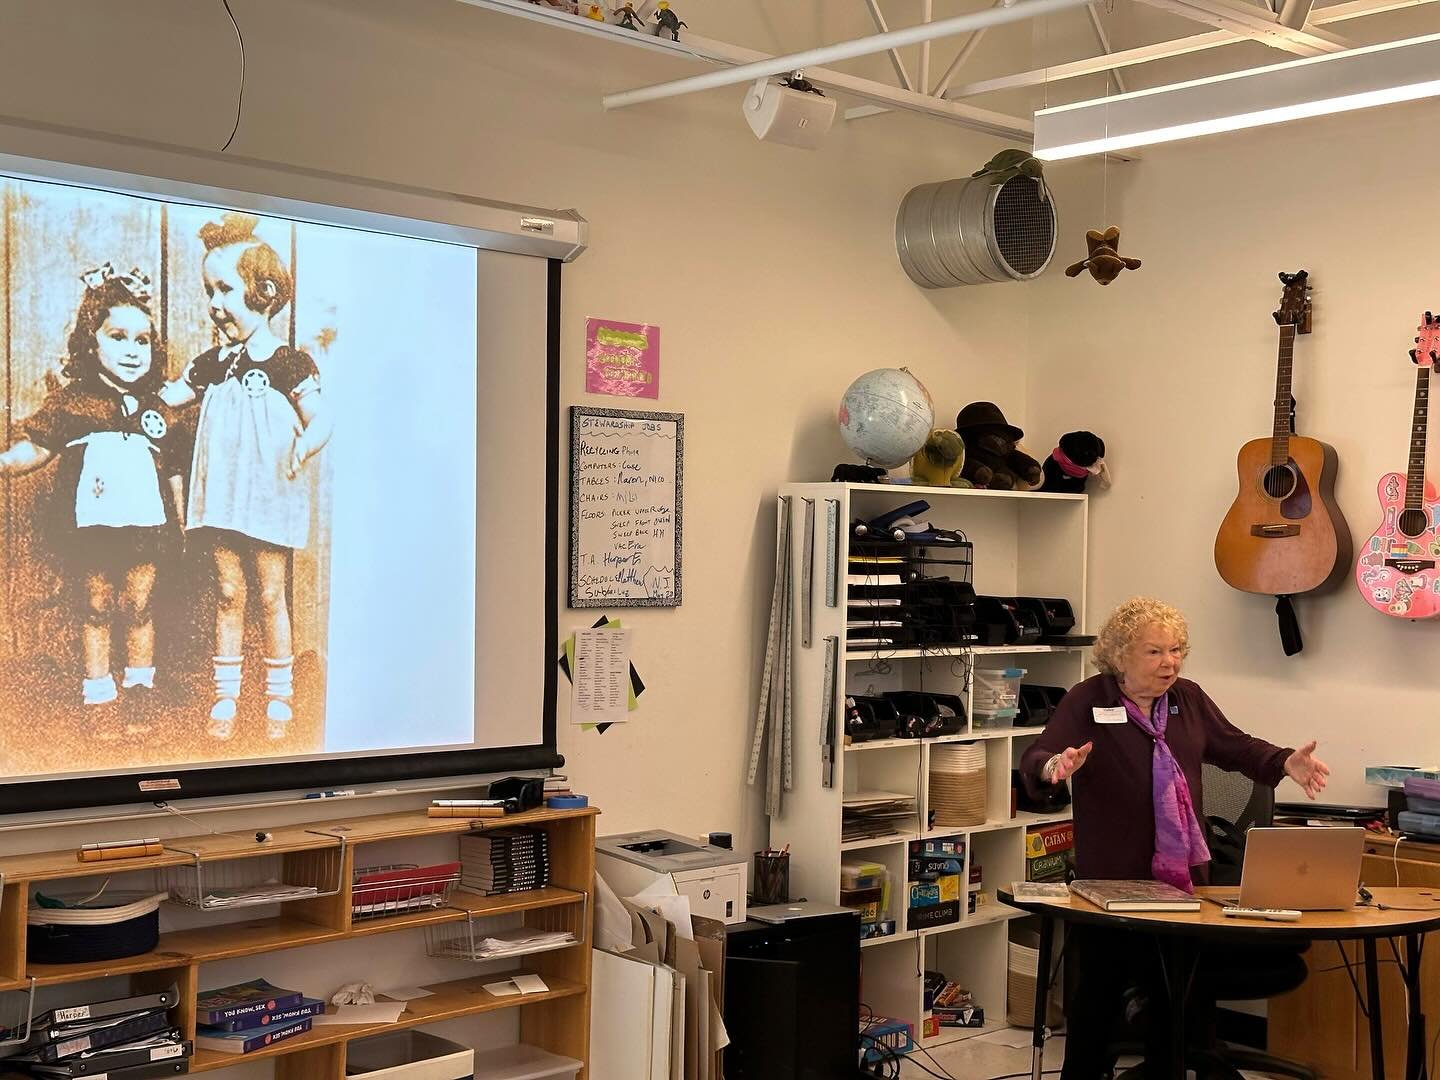 Our 7th and 8th graders were honored by a visit from Henia &ldquo;Henny&rdquo; Lewis, a Holocaust survivor who was smuggled, along with her sister, from a Lithuanian ghetto as a young Jewish girl. Henny shared her incredible story to a rapt audience 